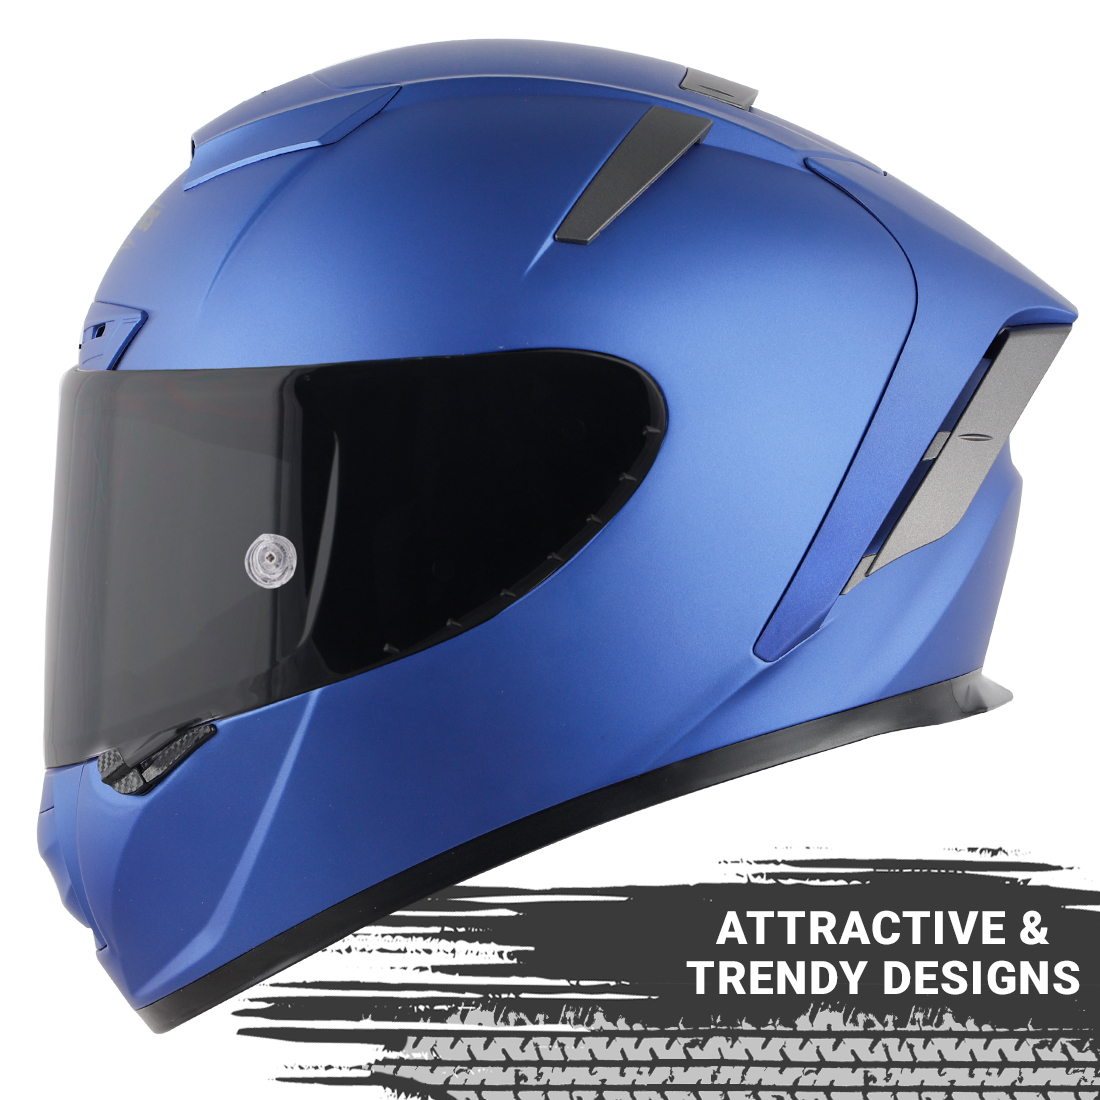 Steelbird SA-5 7Wings Aeronautics Full Face DOT Certified Helmet (Glossy Y. Blue Fitted With Clear Visor And Extra Anti Fog Smoke Visor)